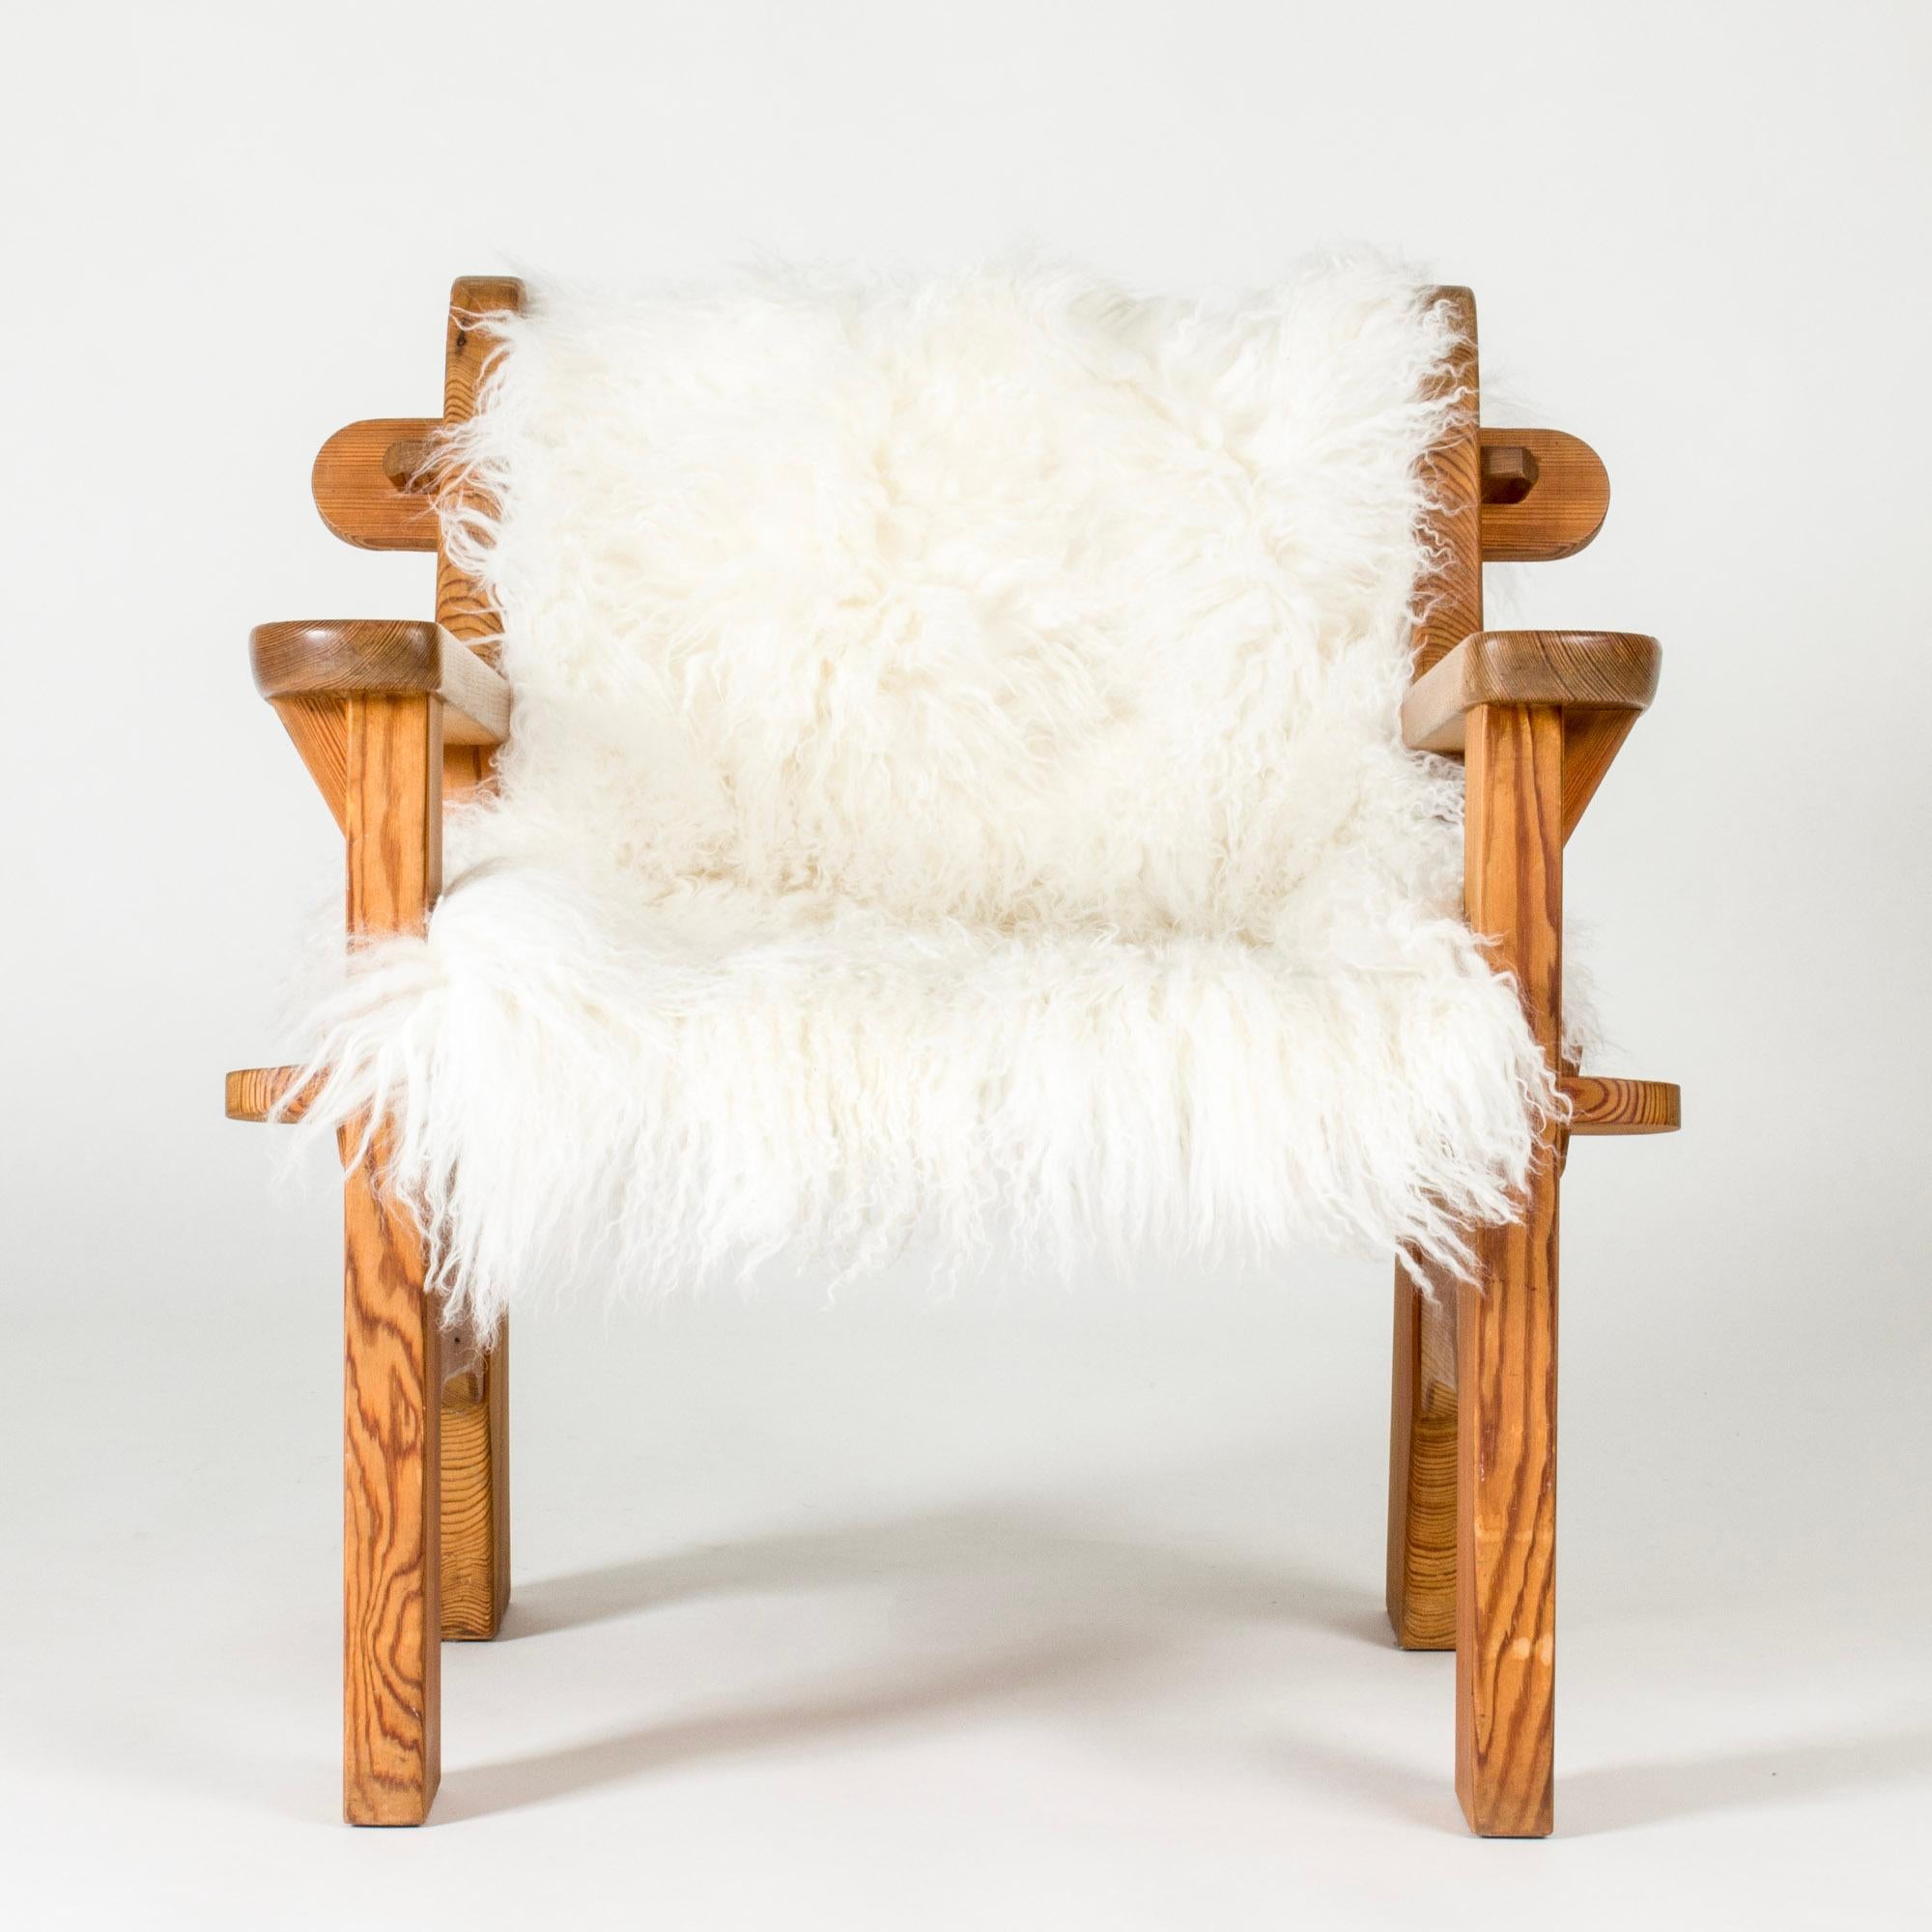 Lounge chair by David Rosén, made from pine in a chunky, rustic design. Rounded details, lovely woodgrain. Comes with a loose sheepskin.